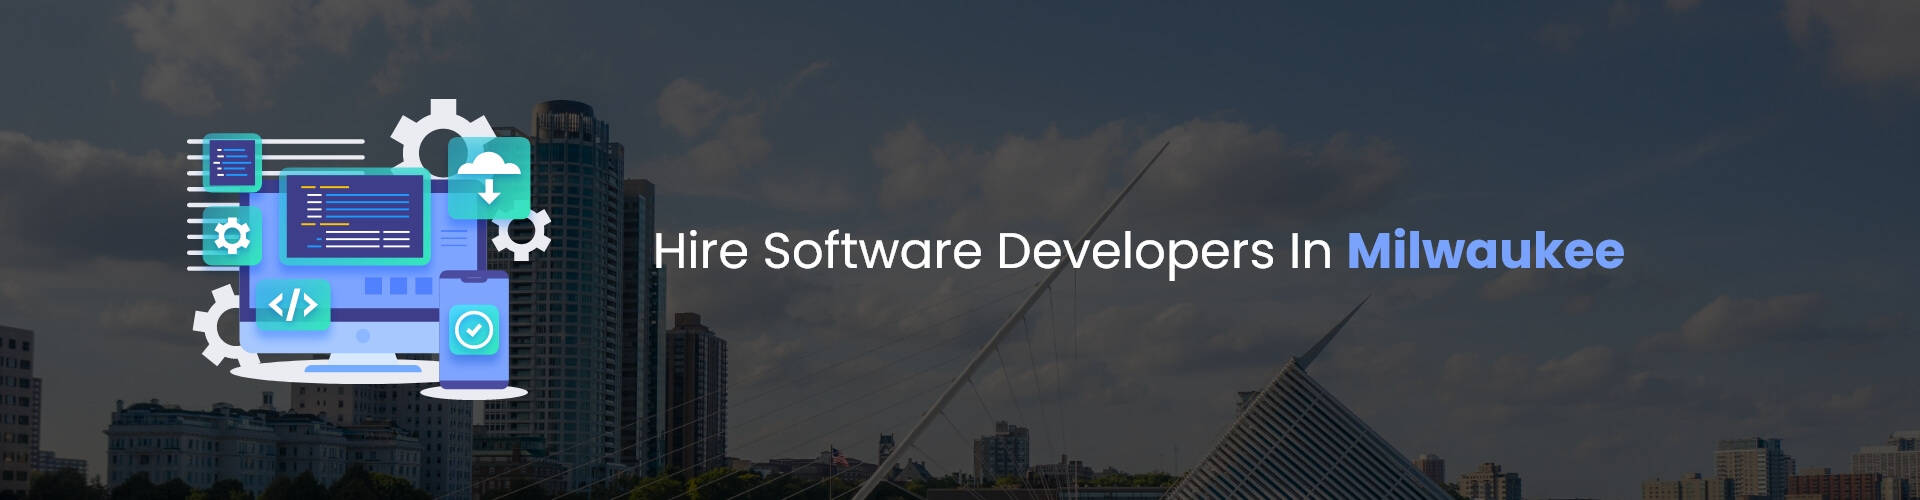 hire software developers in milwaukee